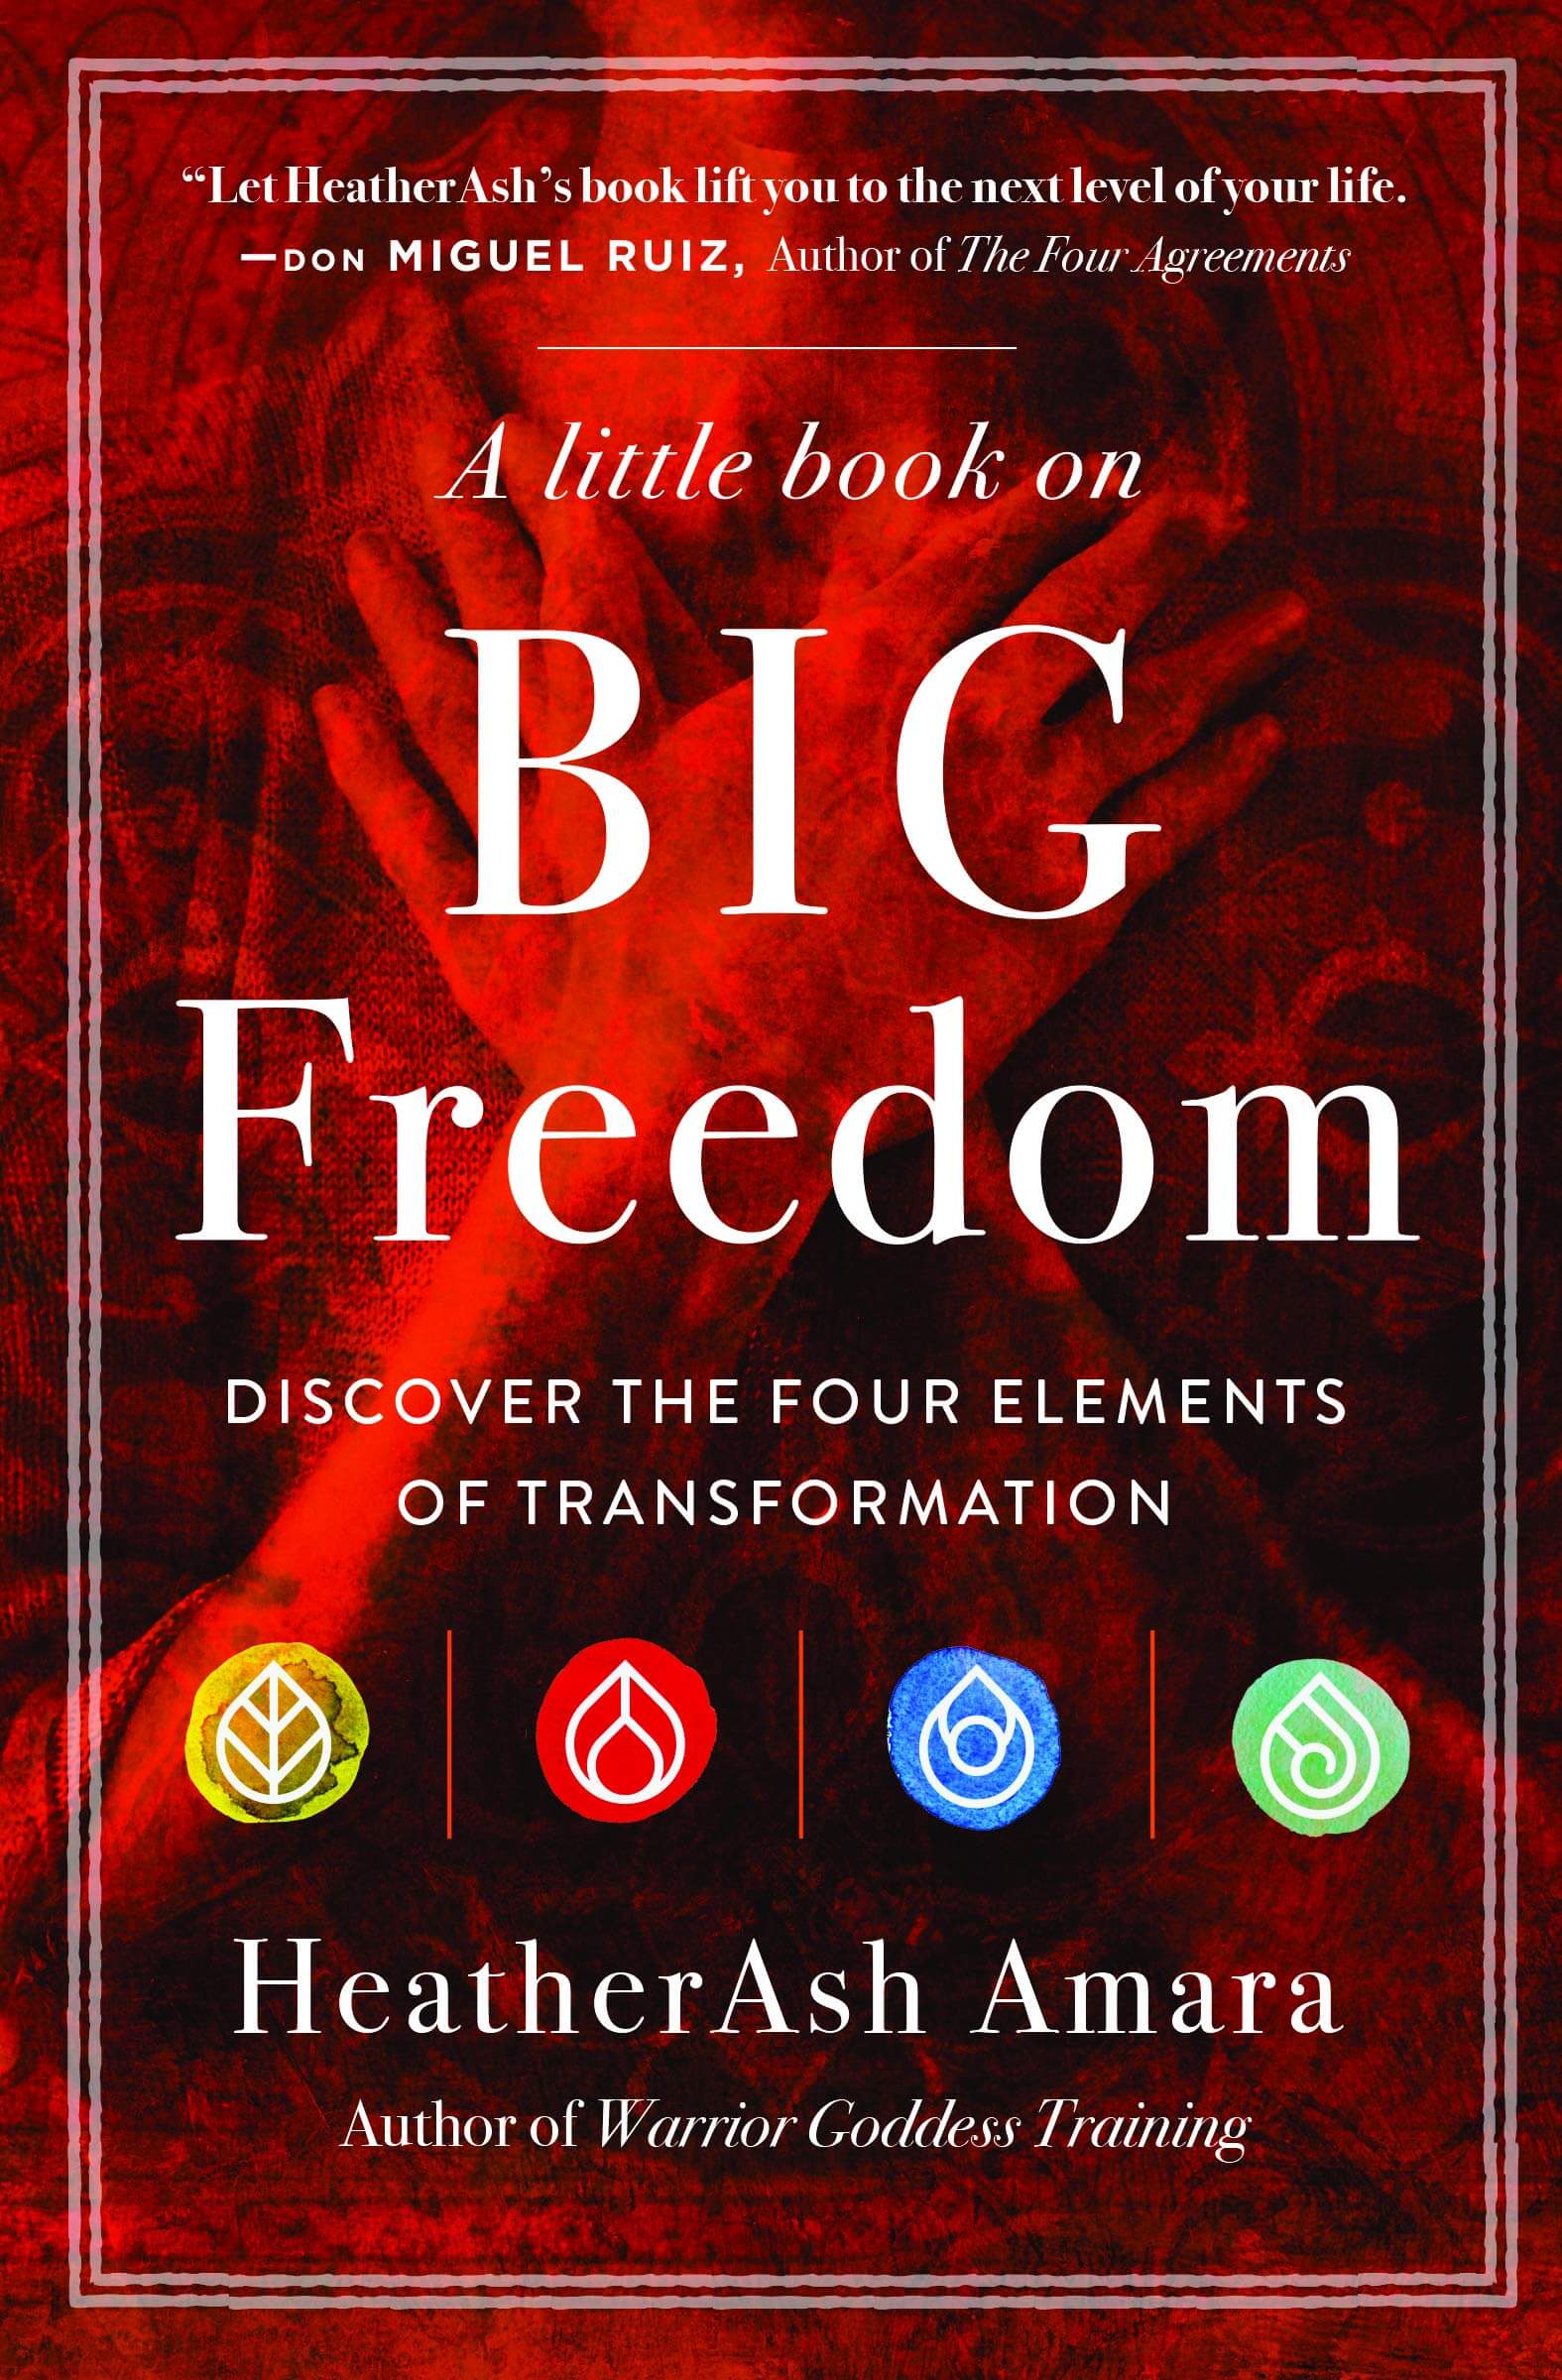 Book Cover for A Little Book on Big Freedom by HeatherAsh Amara